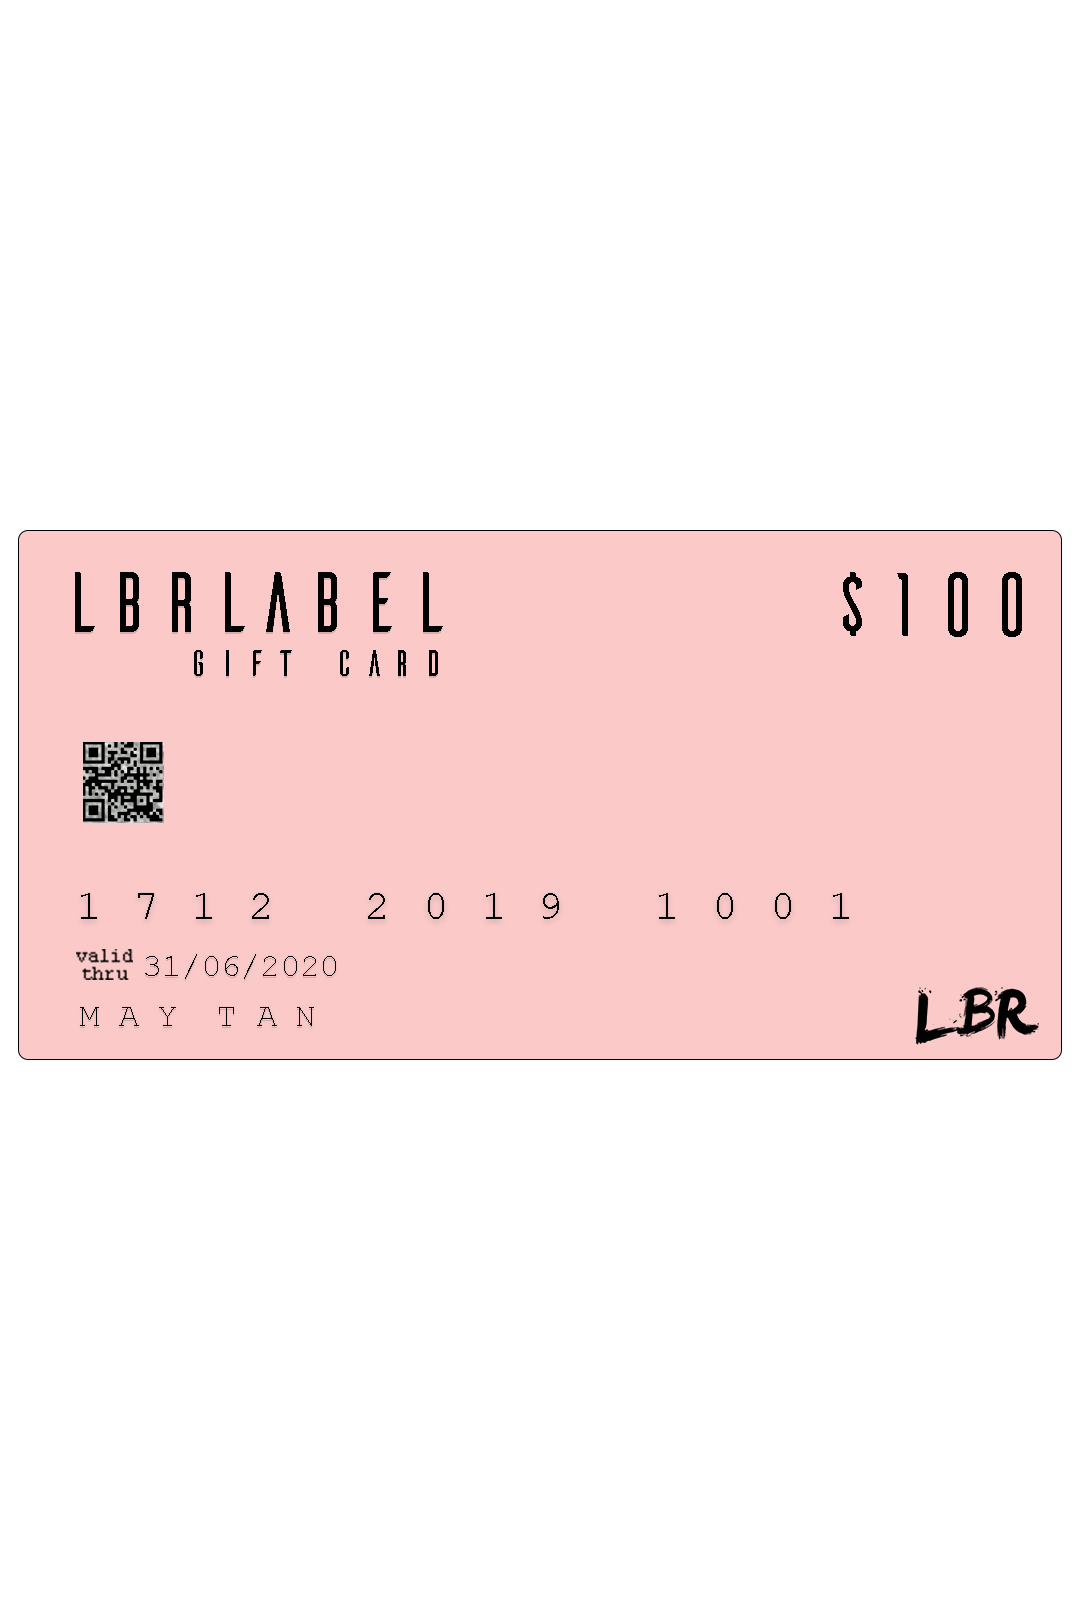 $100 LBR Gift Card